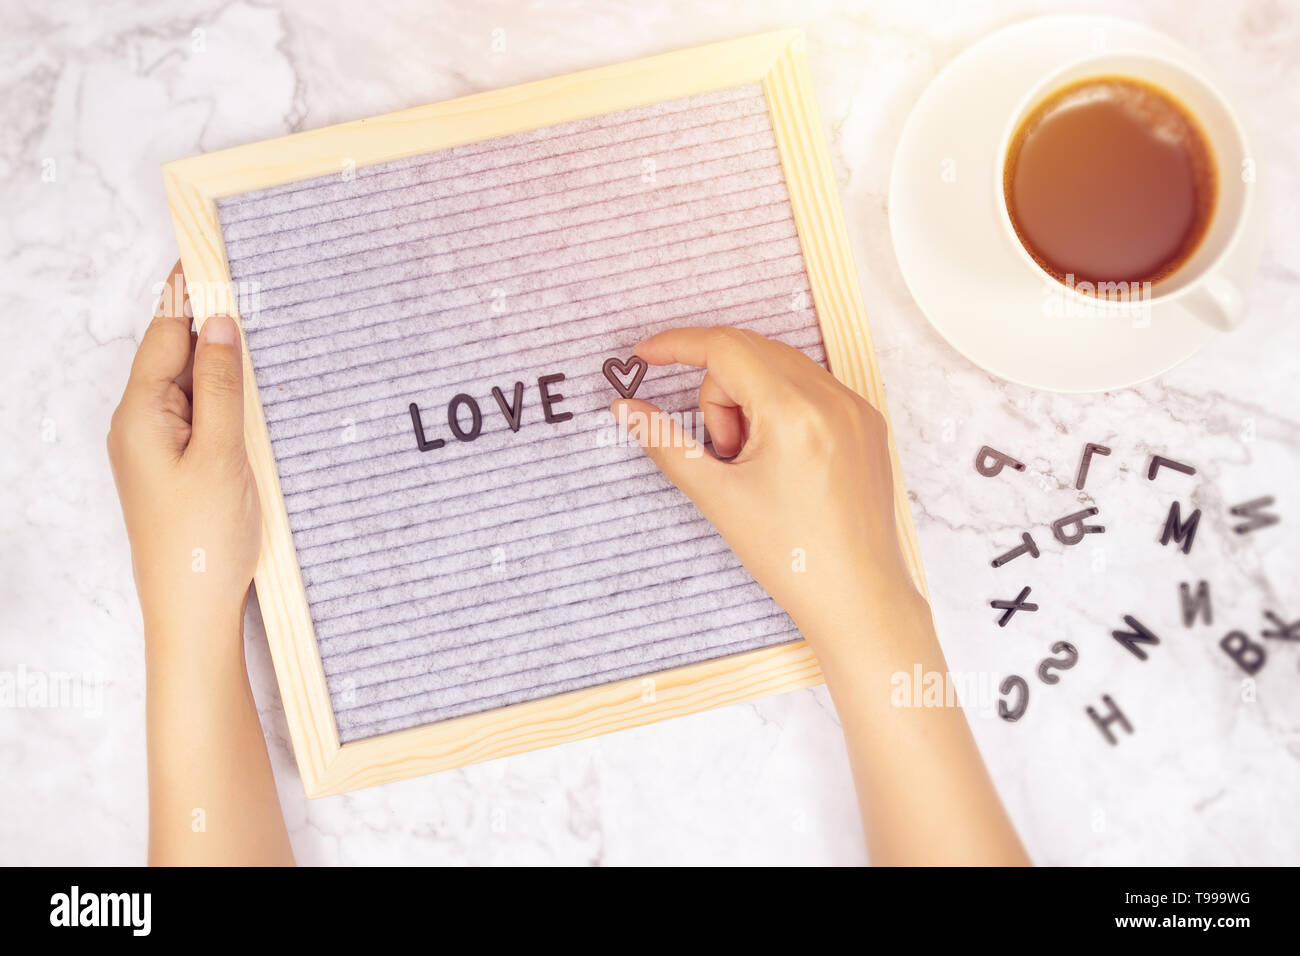 word LOVE on letter board with woman's hand holding heart symbol on white marble desk background with coffee cup Stock Photo